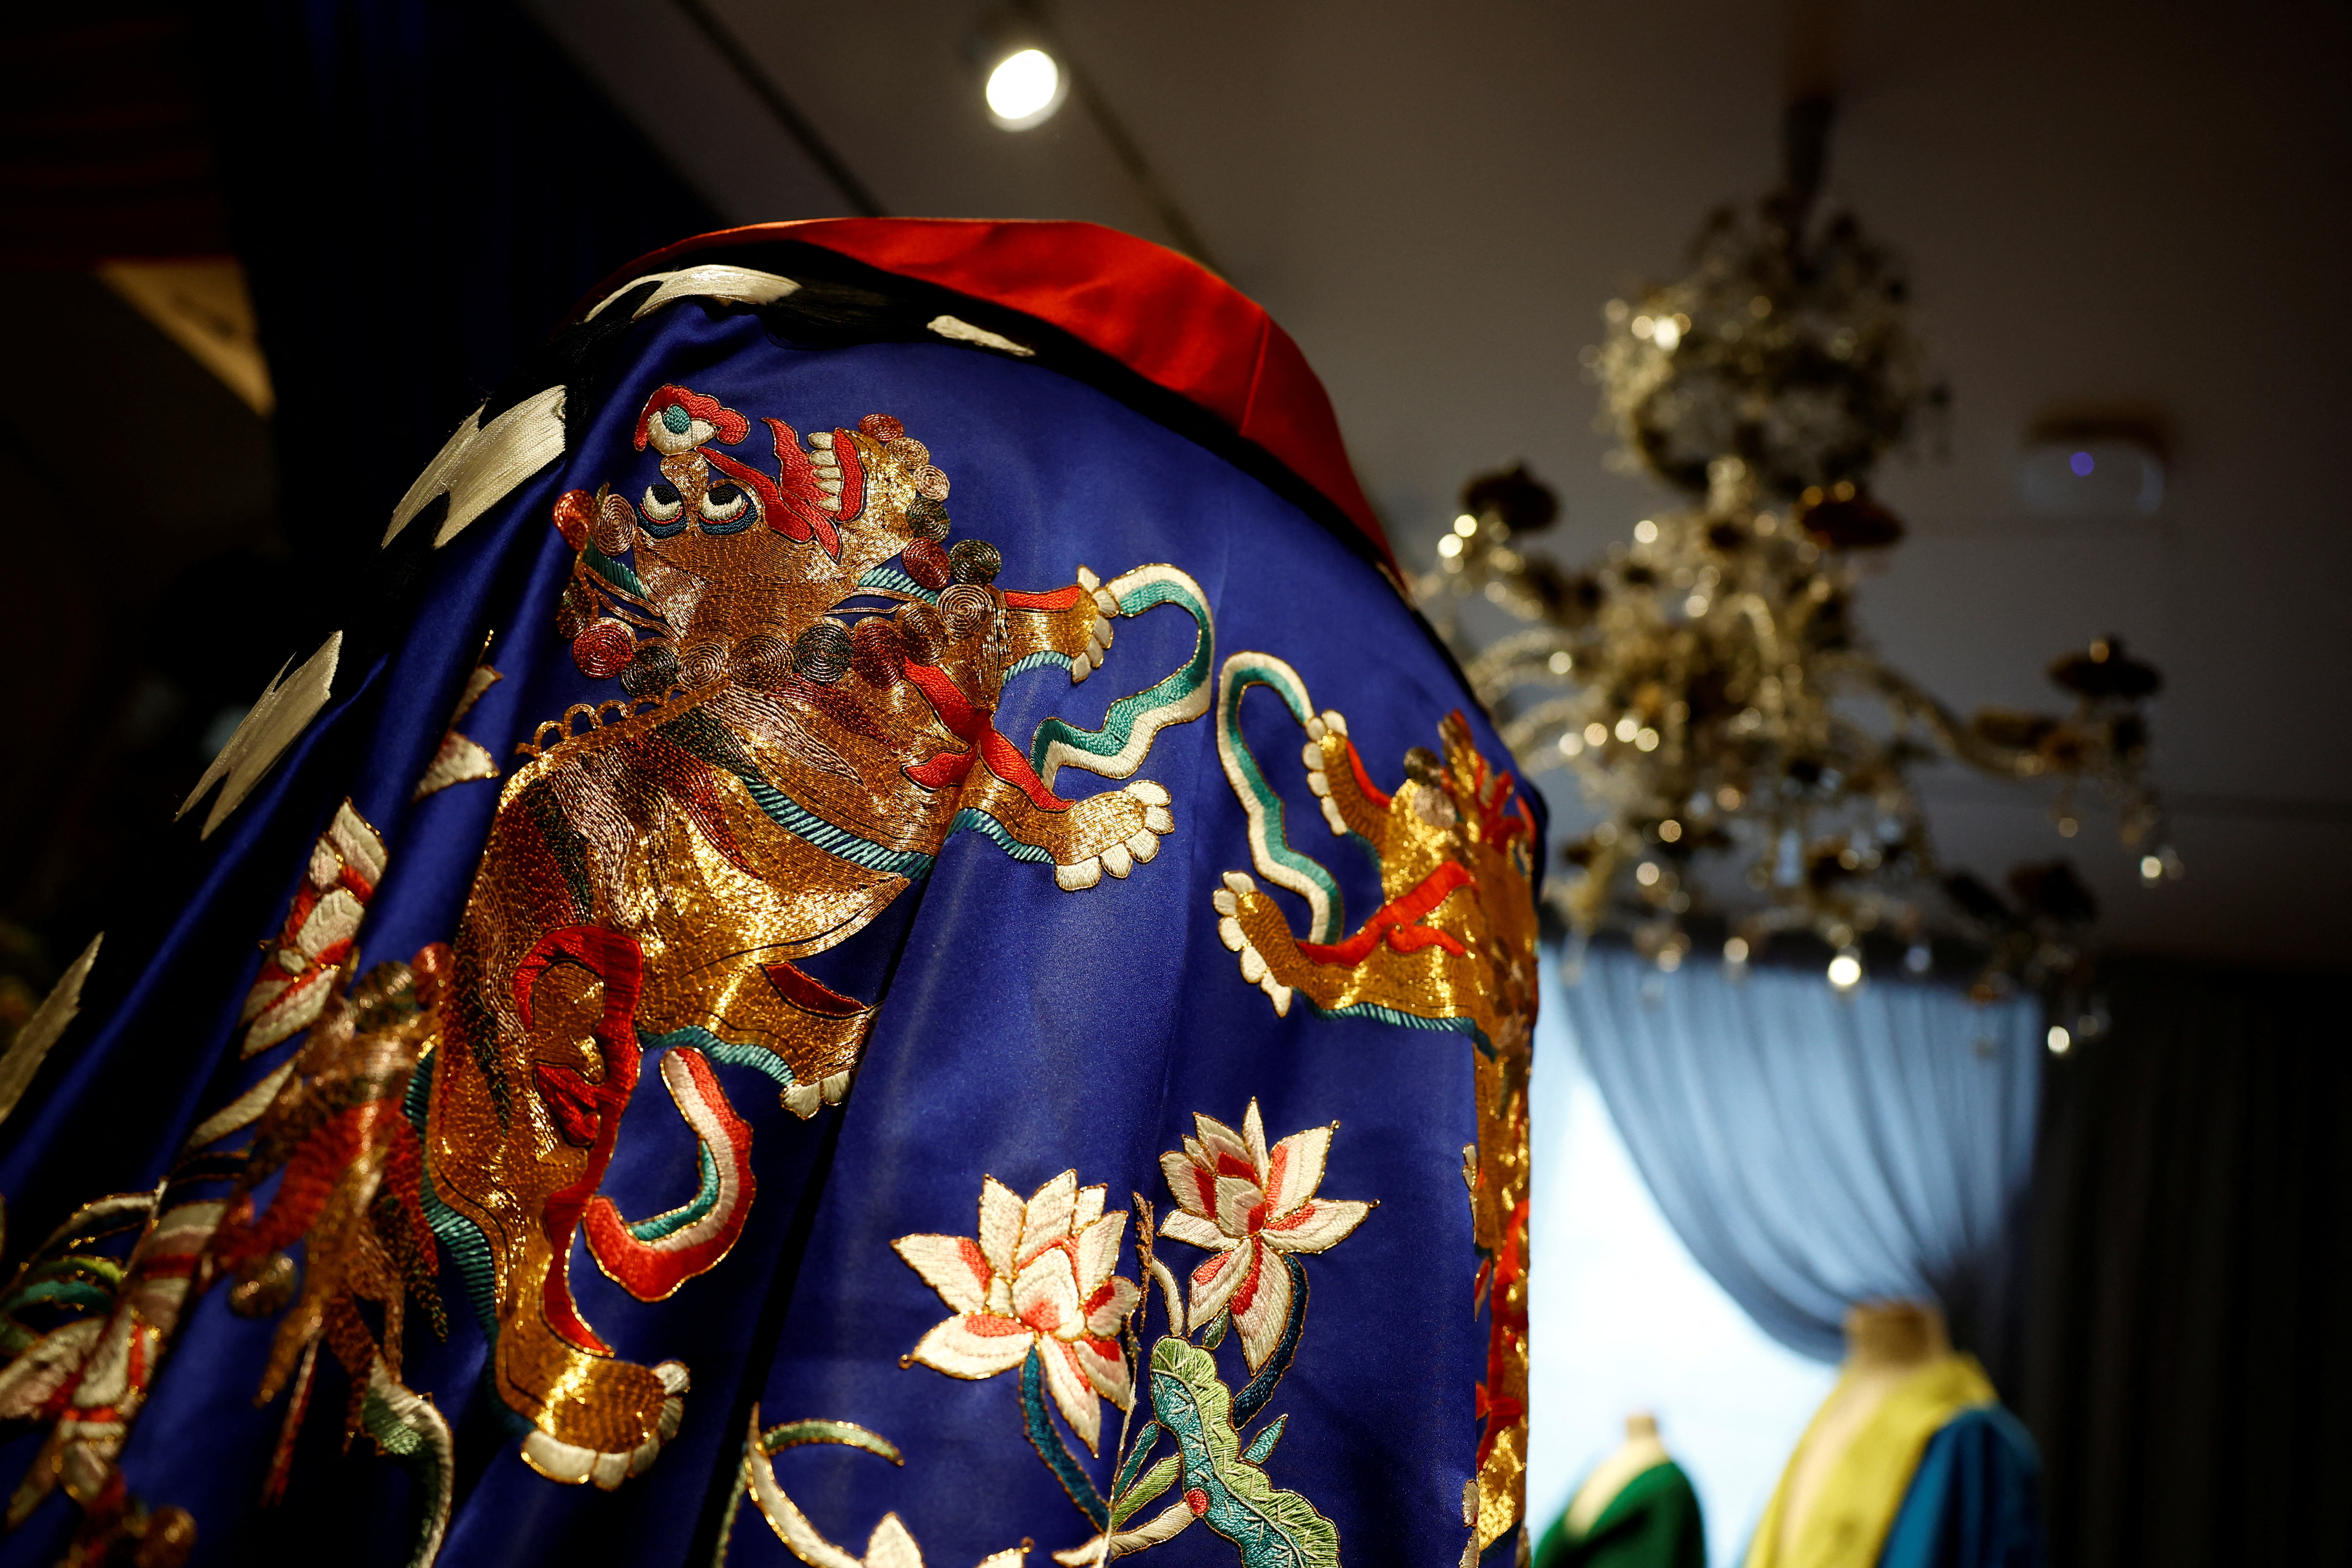 Couture collection of late fashion icon Andre Leon Talley on exhibit before auction at Christie's in Paris